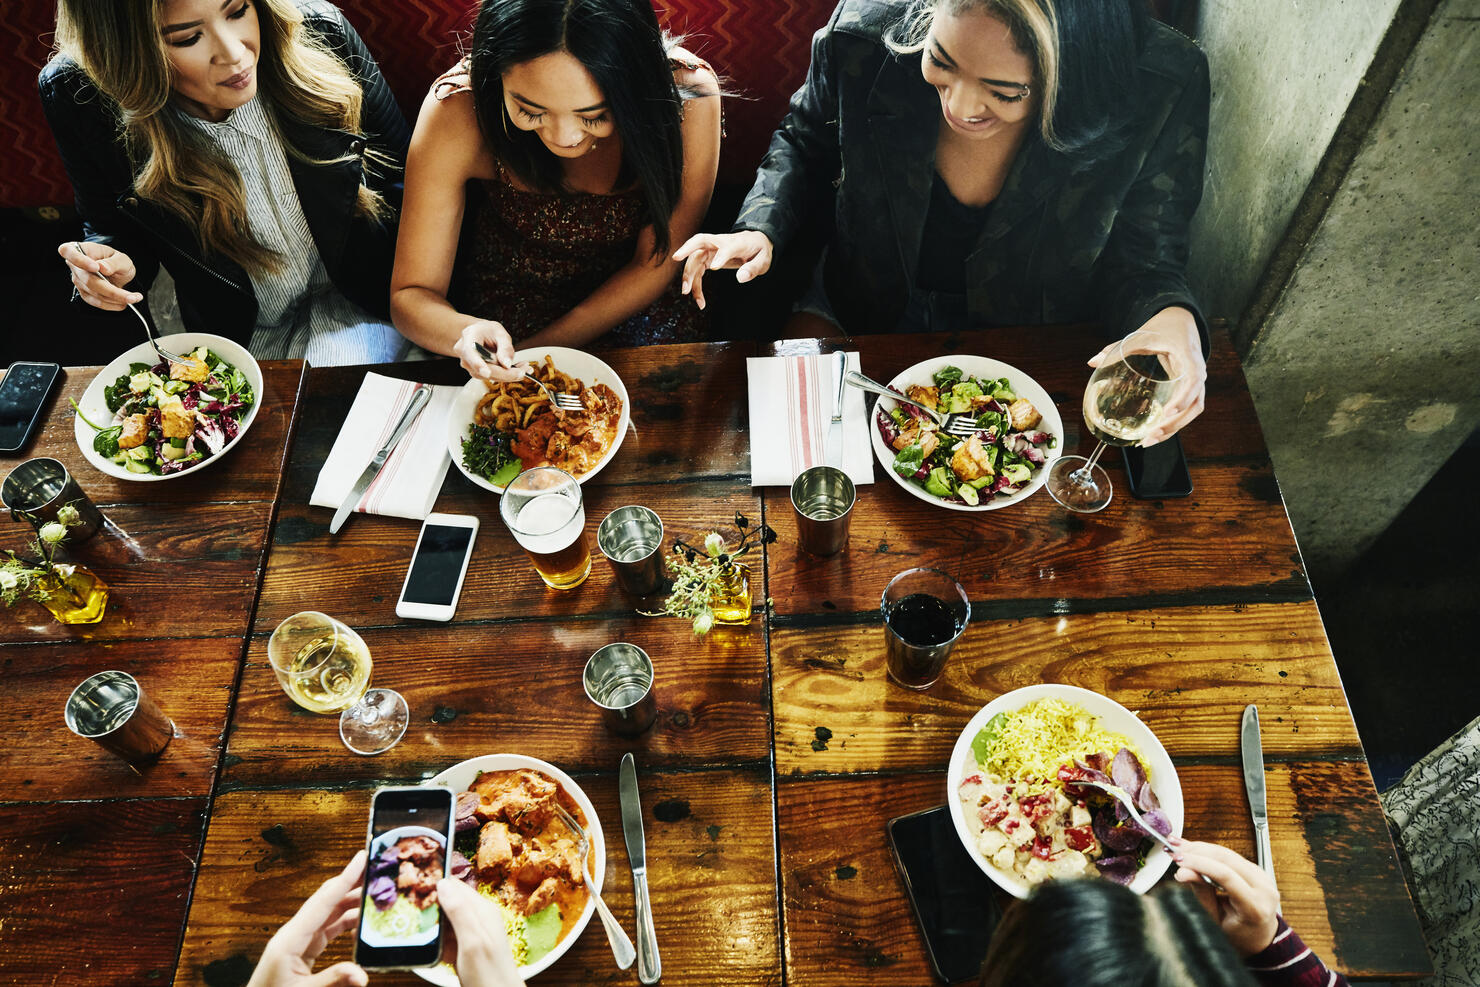 Overhead view of smiling female friends sharing lunch in restaurant